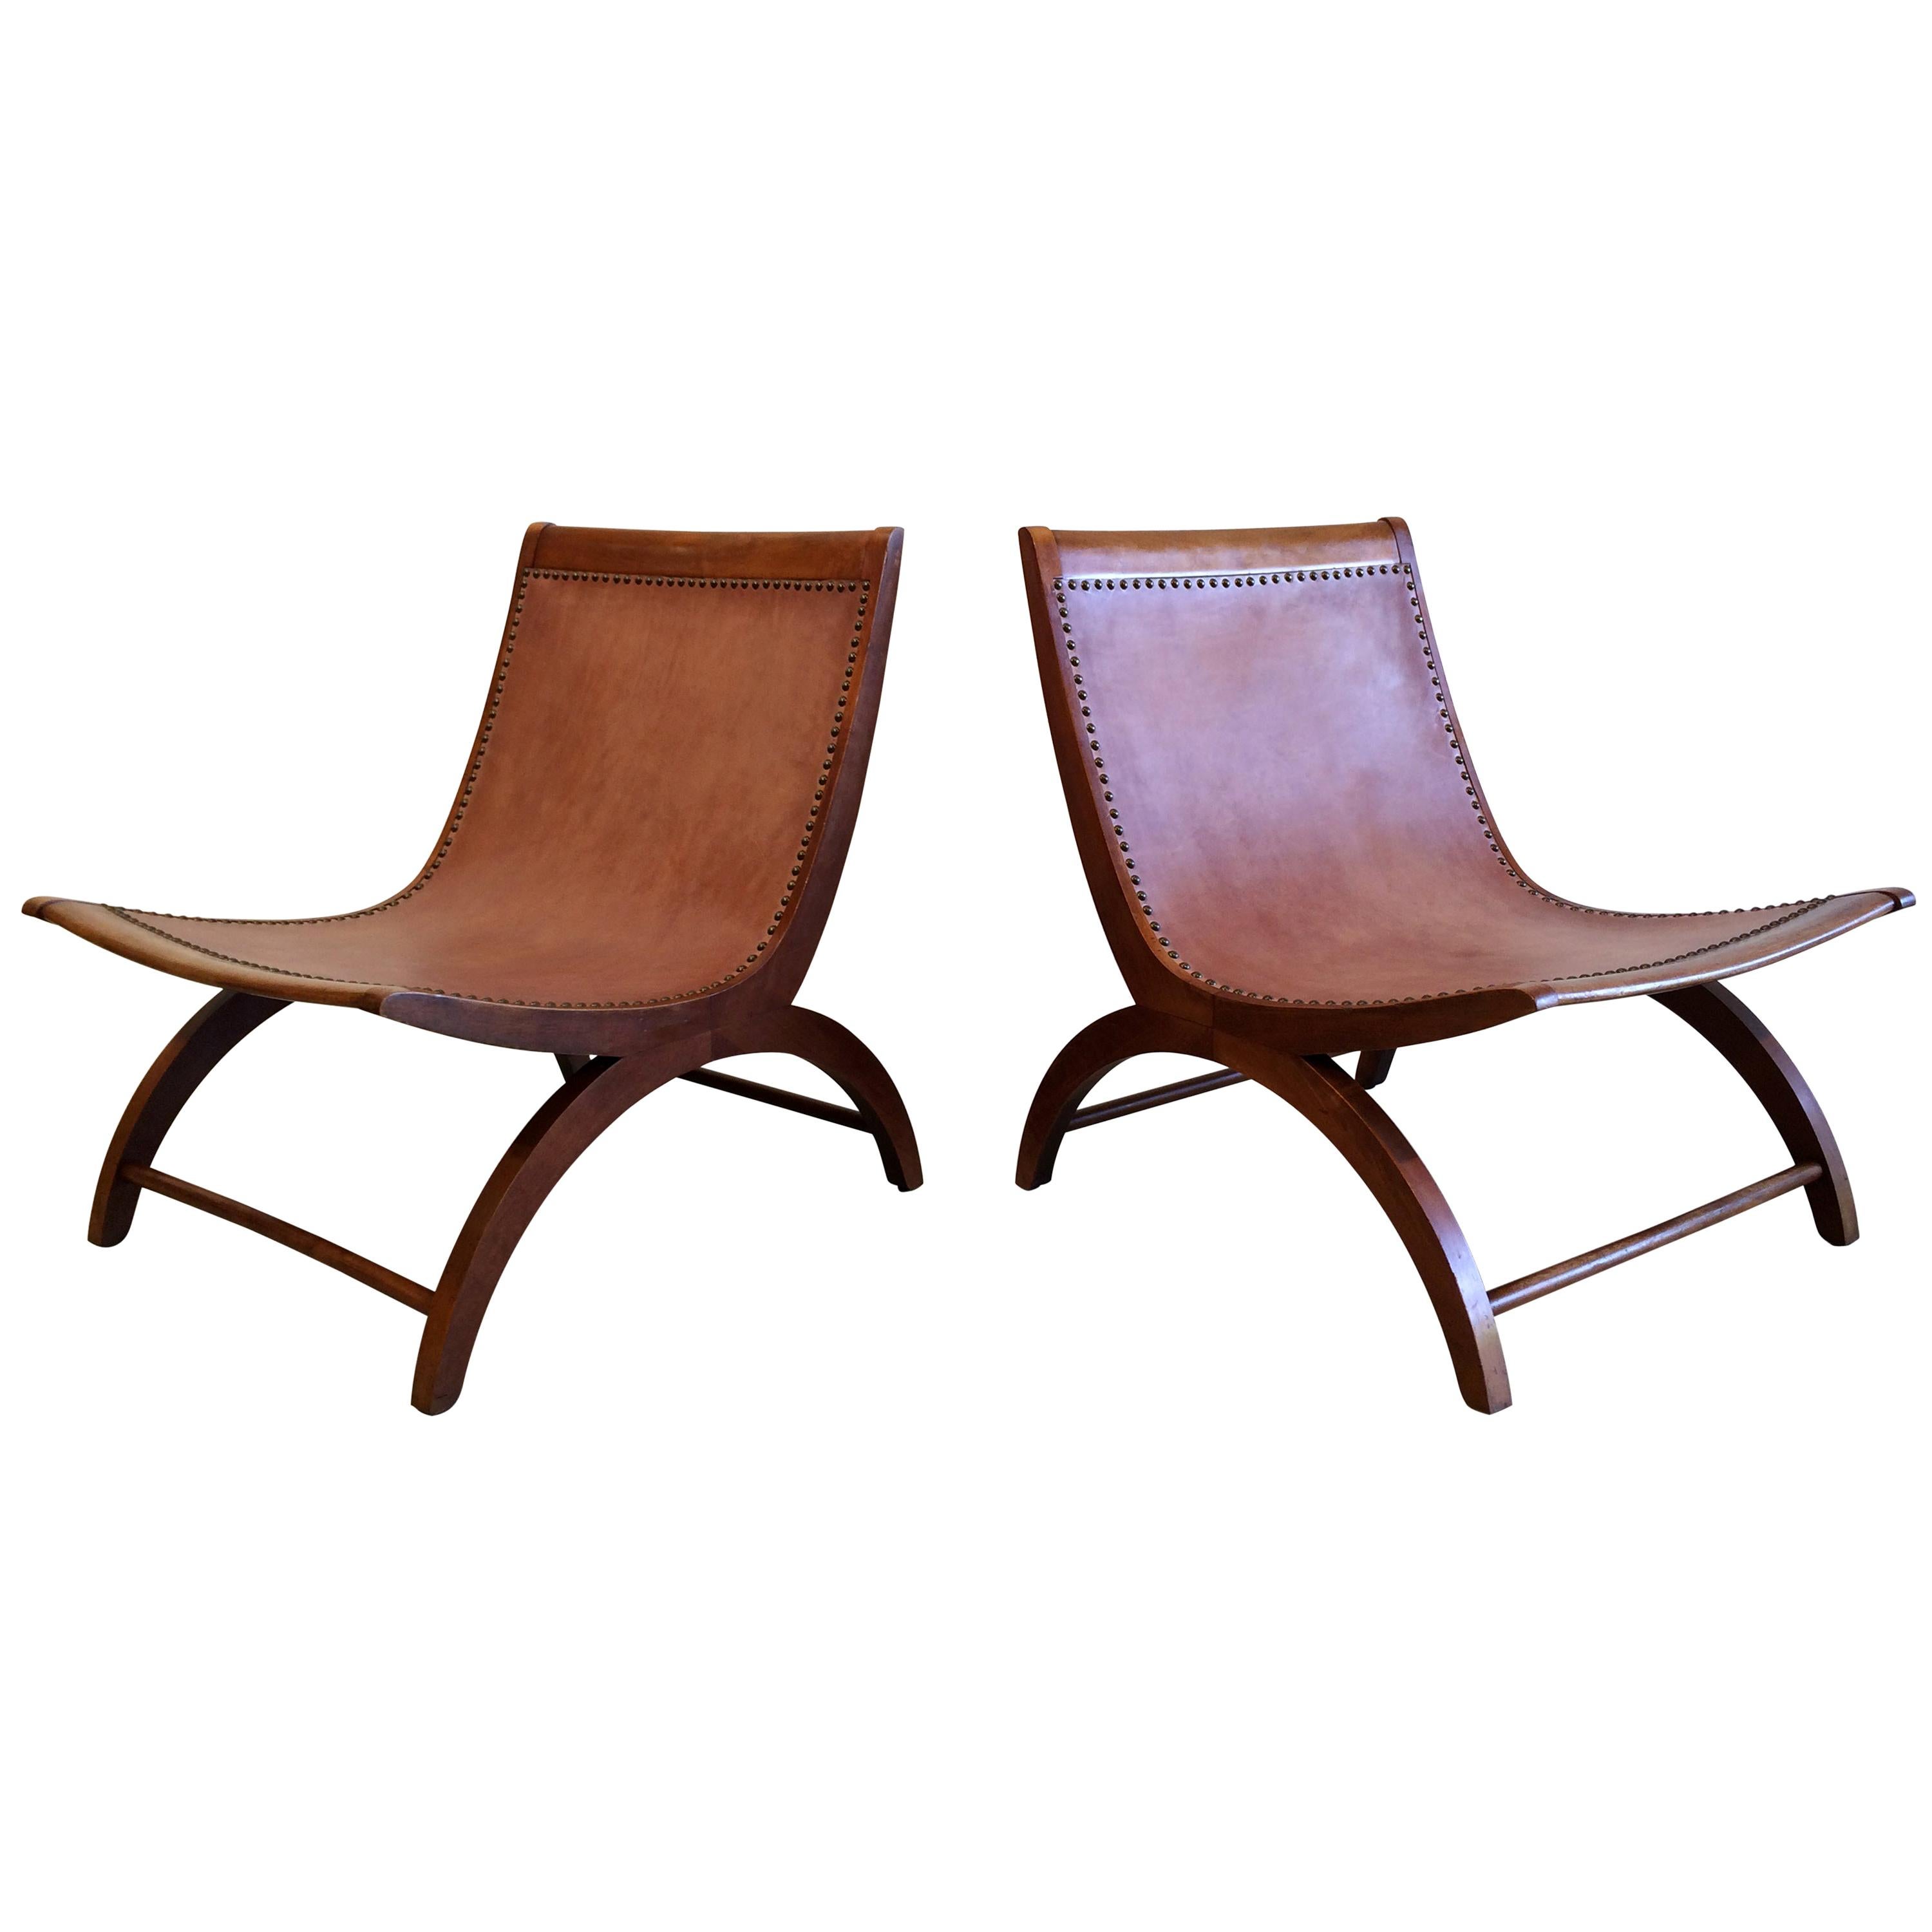 Rare pair of wooden lounge chairs with saddle leather seats.